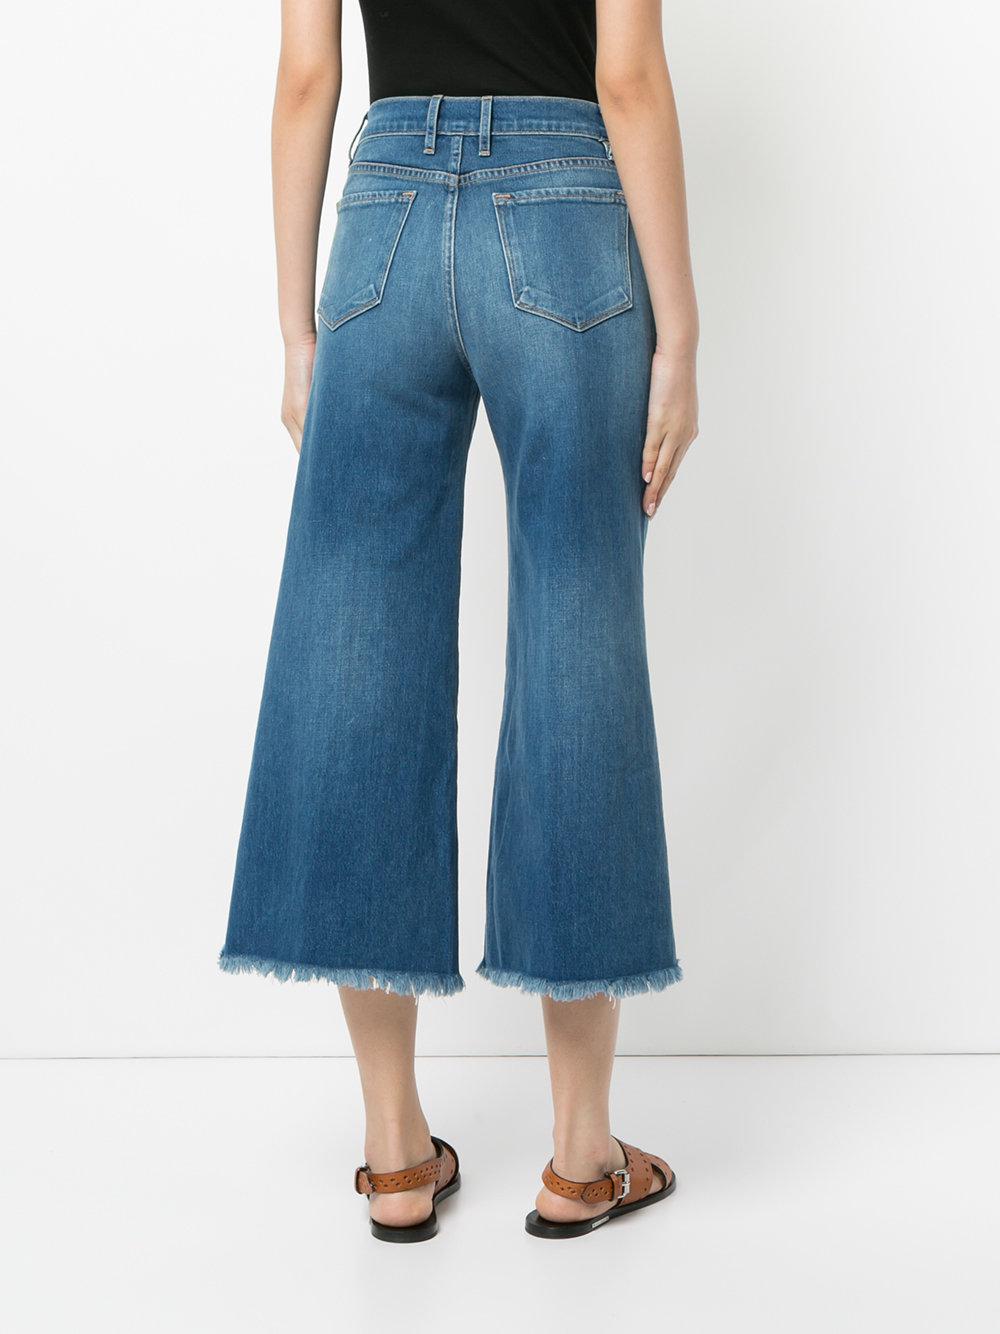 Lyst - Frame Le Palazzo Raw Edge Crop Jeans in Blue